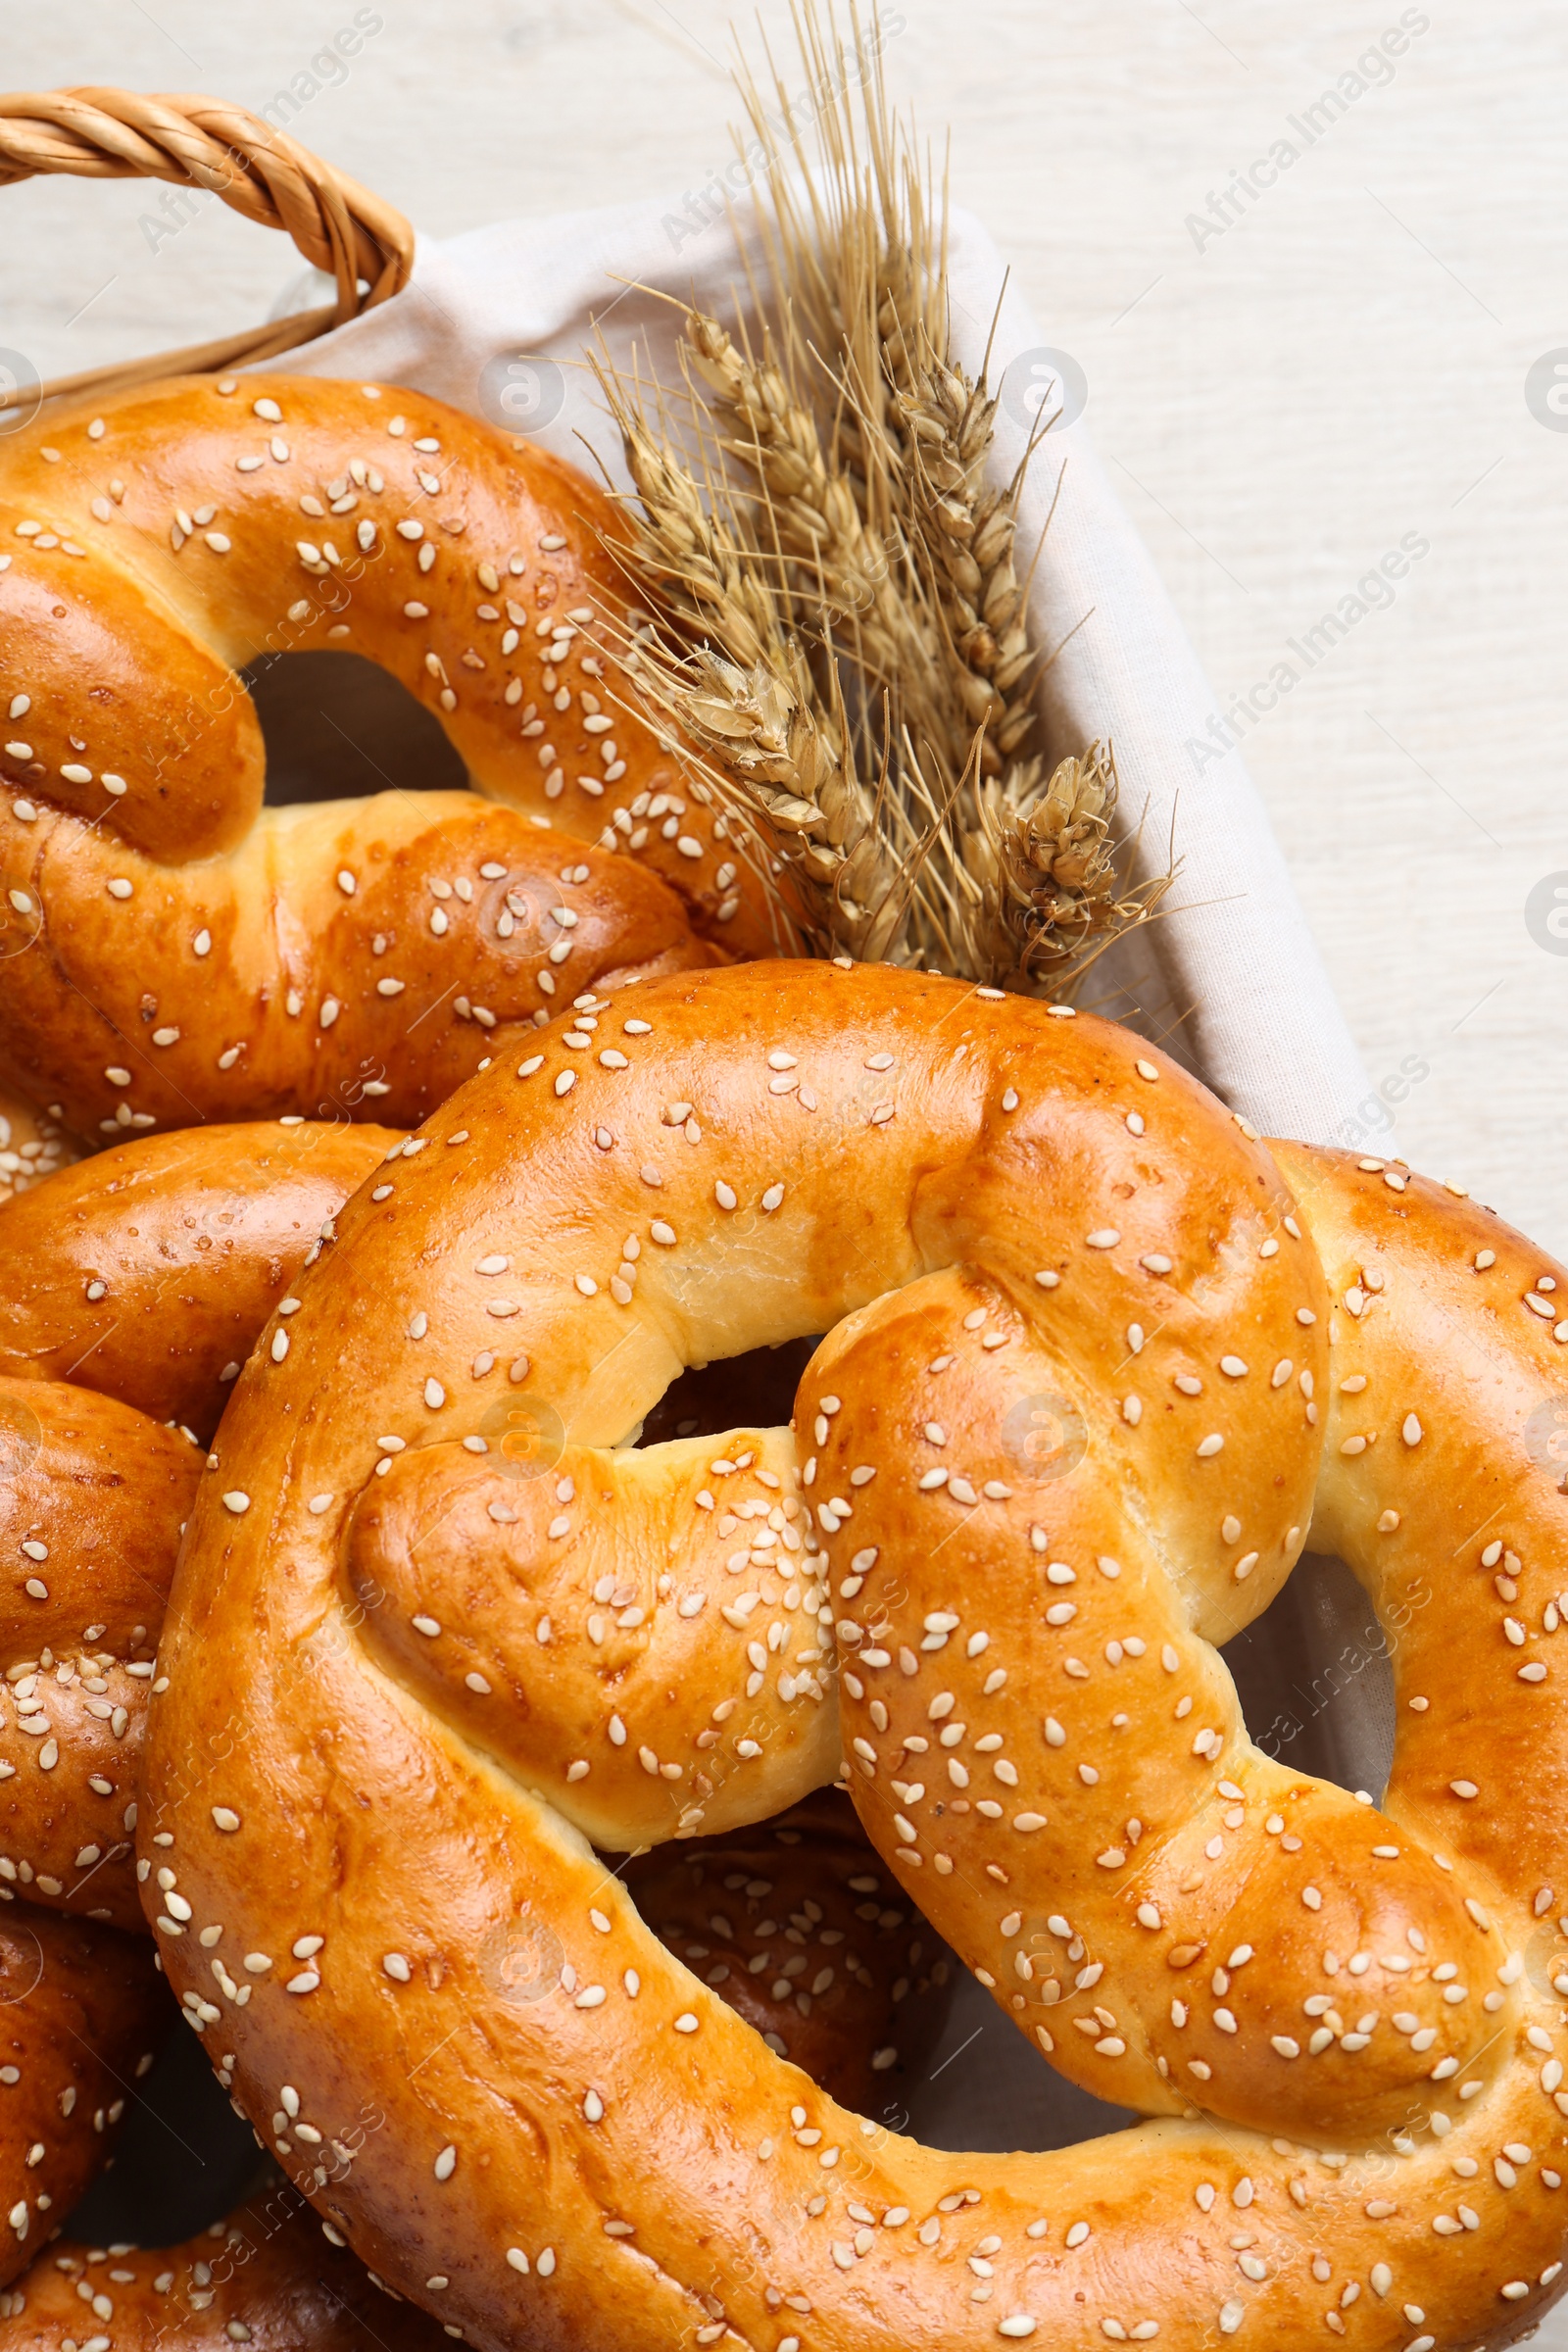 Photo of Basket with delicious pretzels and wheat spikes on white table, closeup